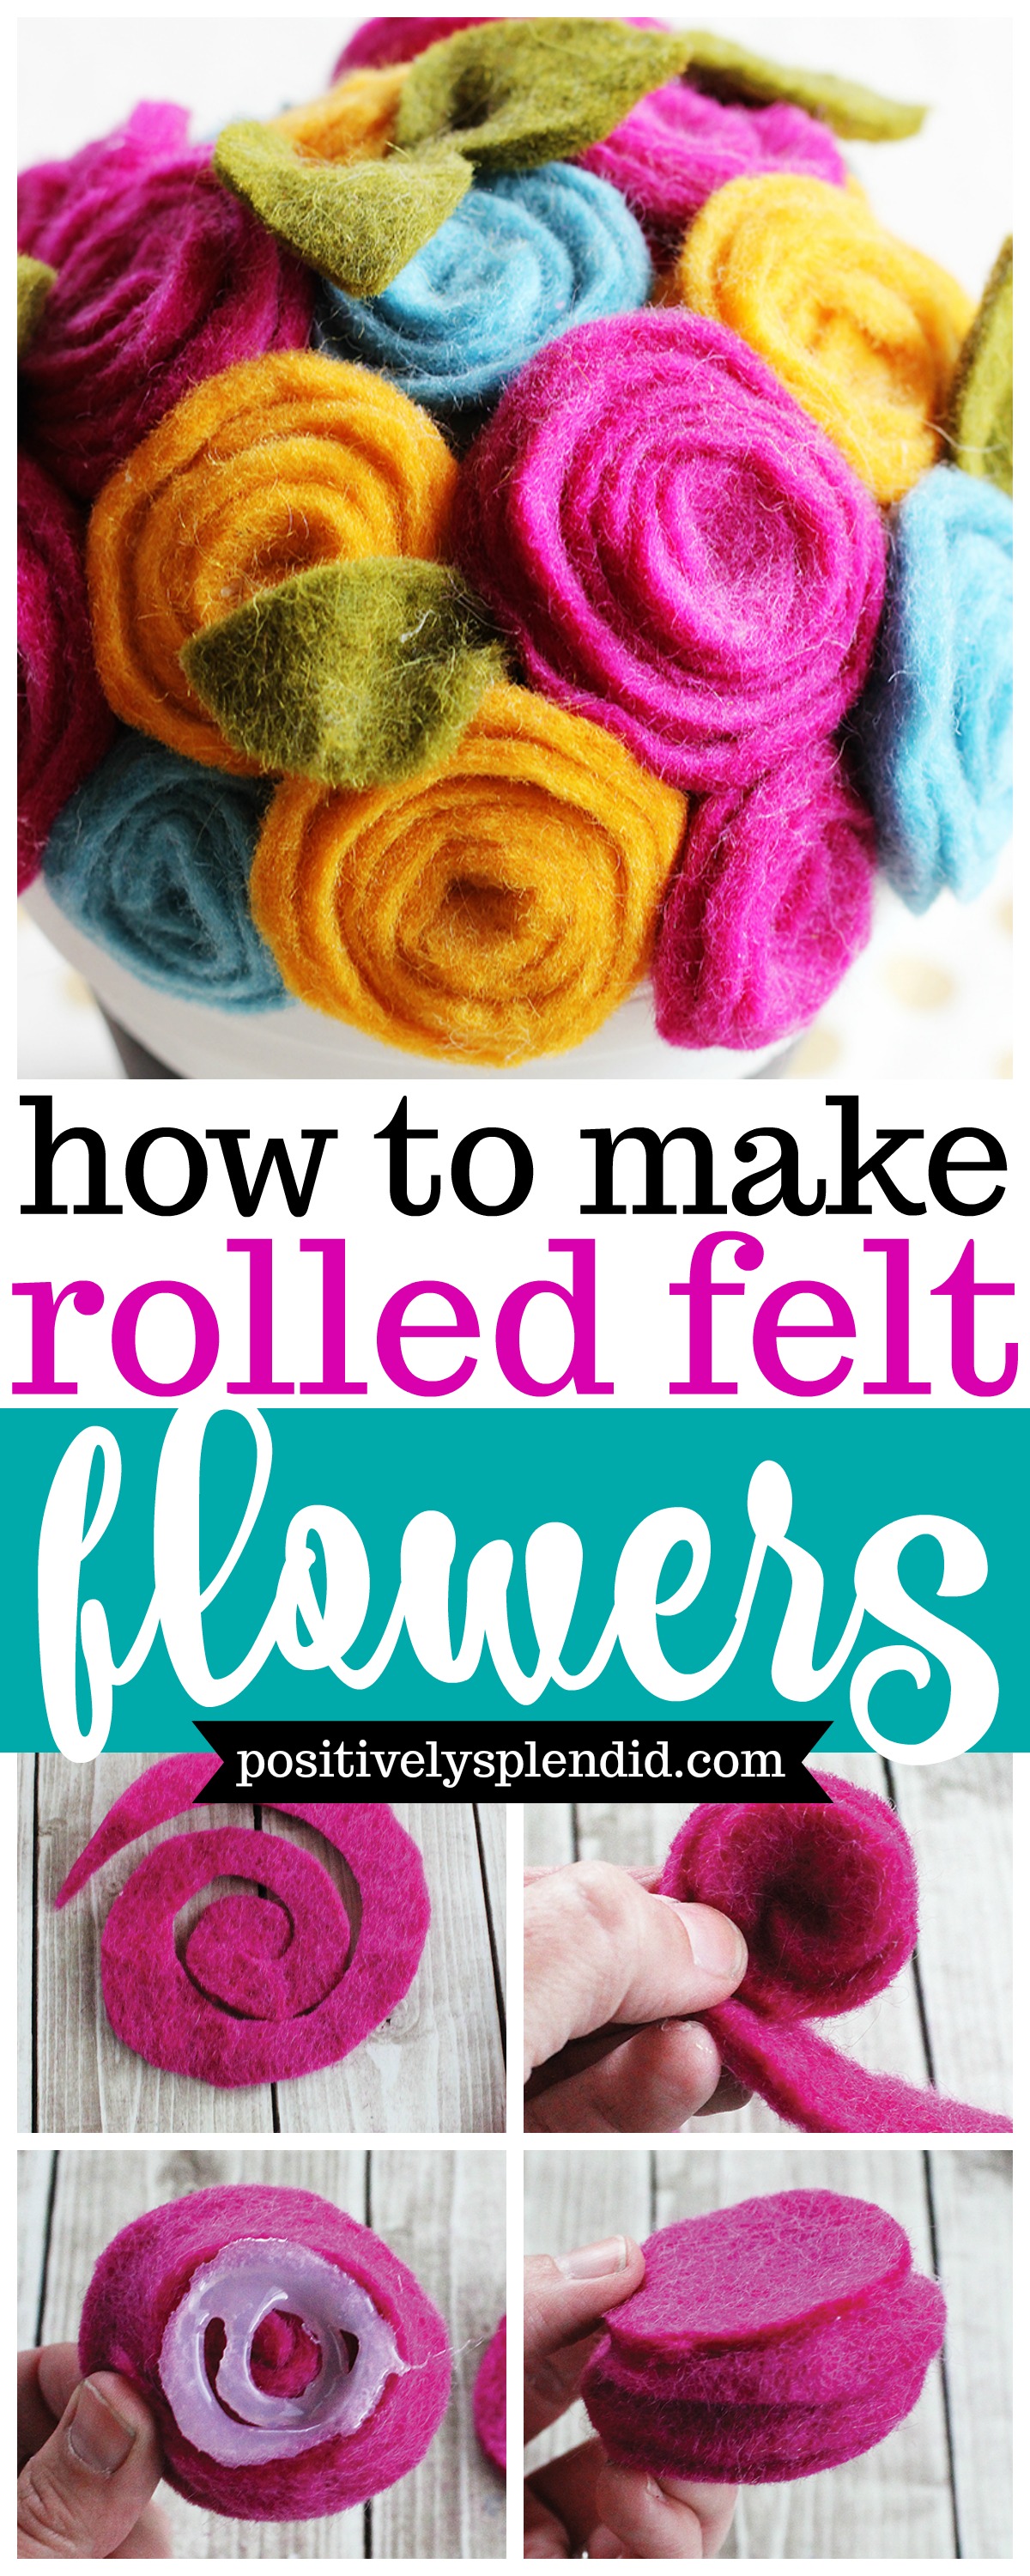 How to Make Rolled Felt Flowers - Positively Splendid {Crafts, Sewing,  Recipes and Home Decor}